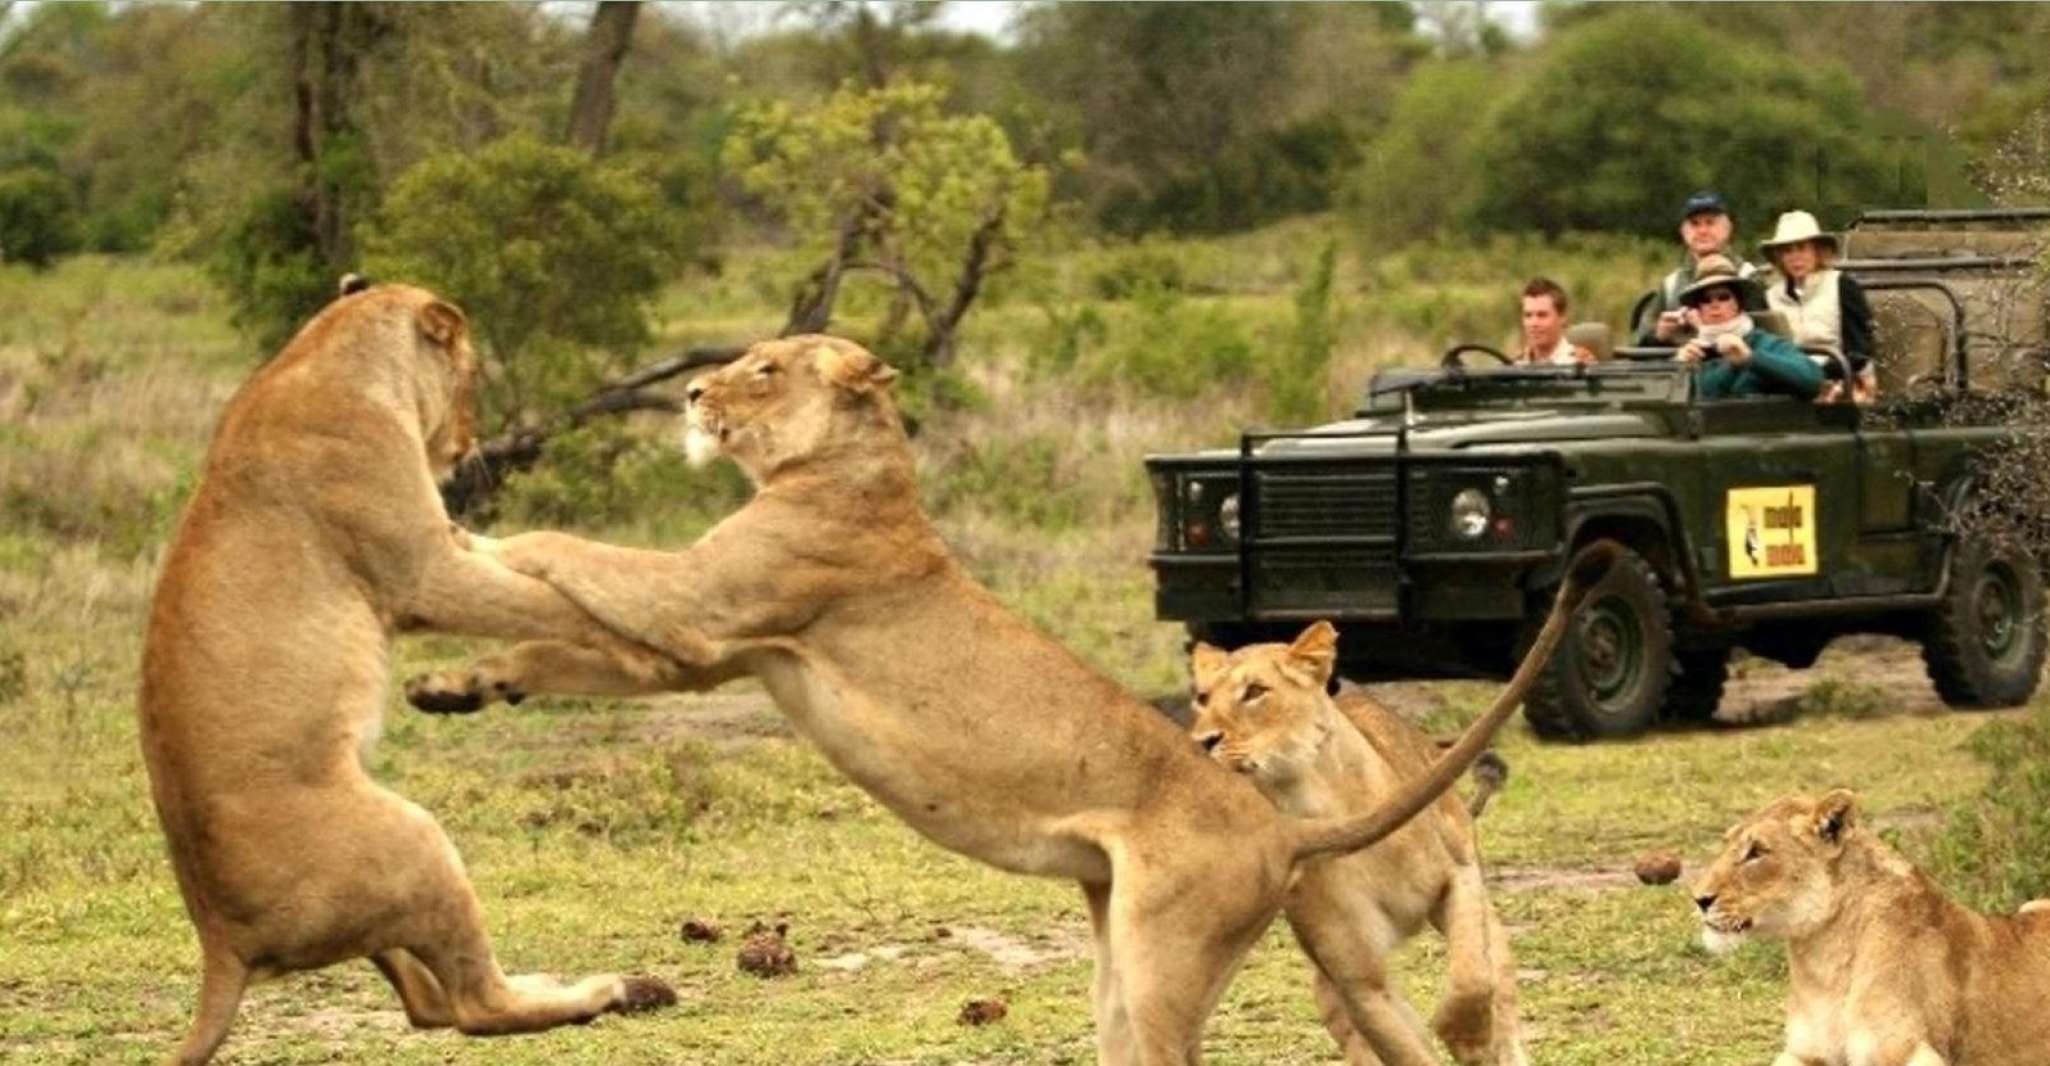 Tala Game Reserve & Natal Lion Park Day Tour From Durban - Housity